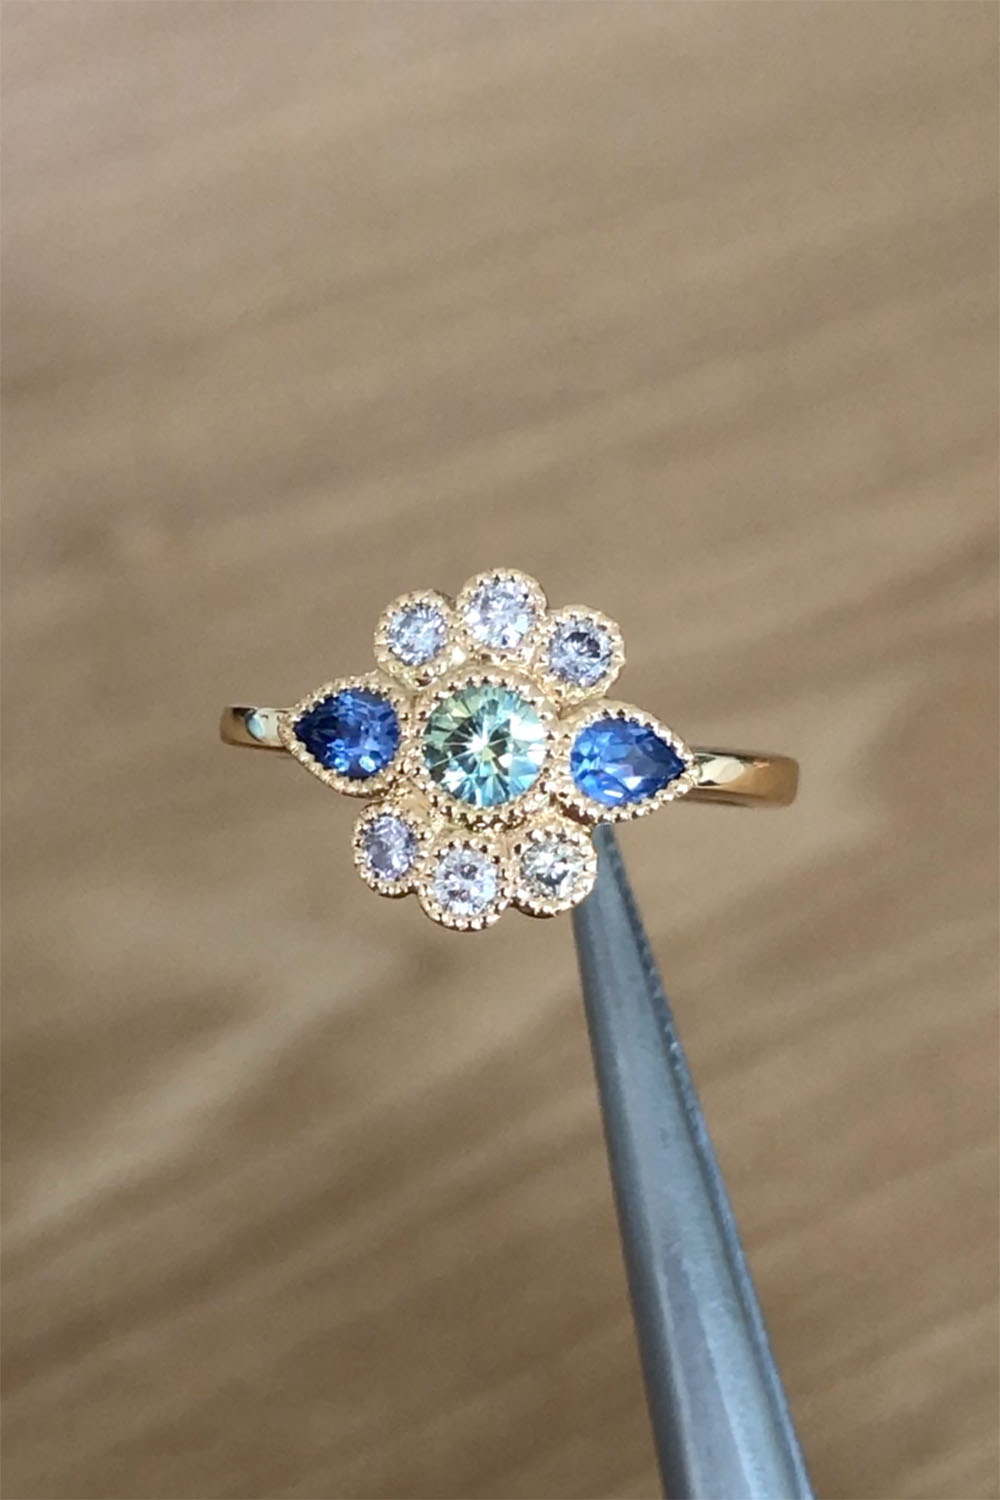 Australian parti sapphire, Ceylon sapphire and diamond ring in recycled gold